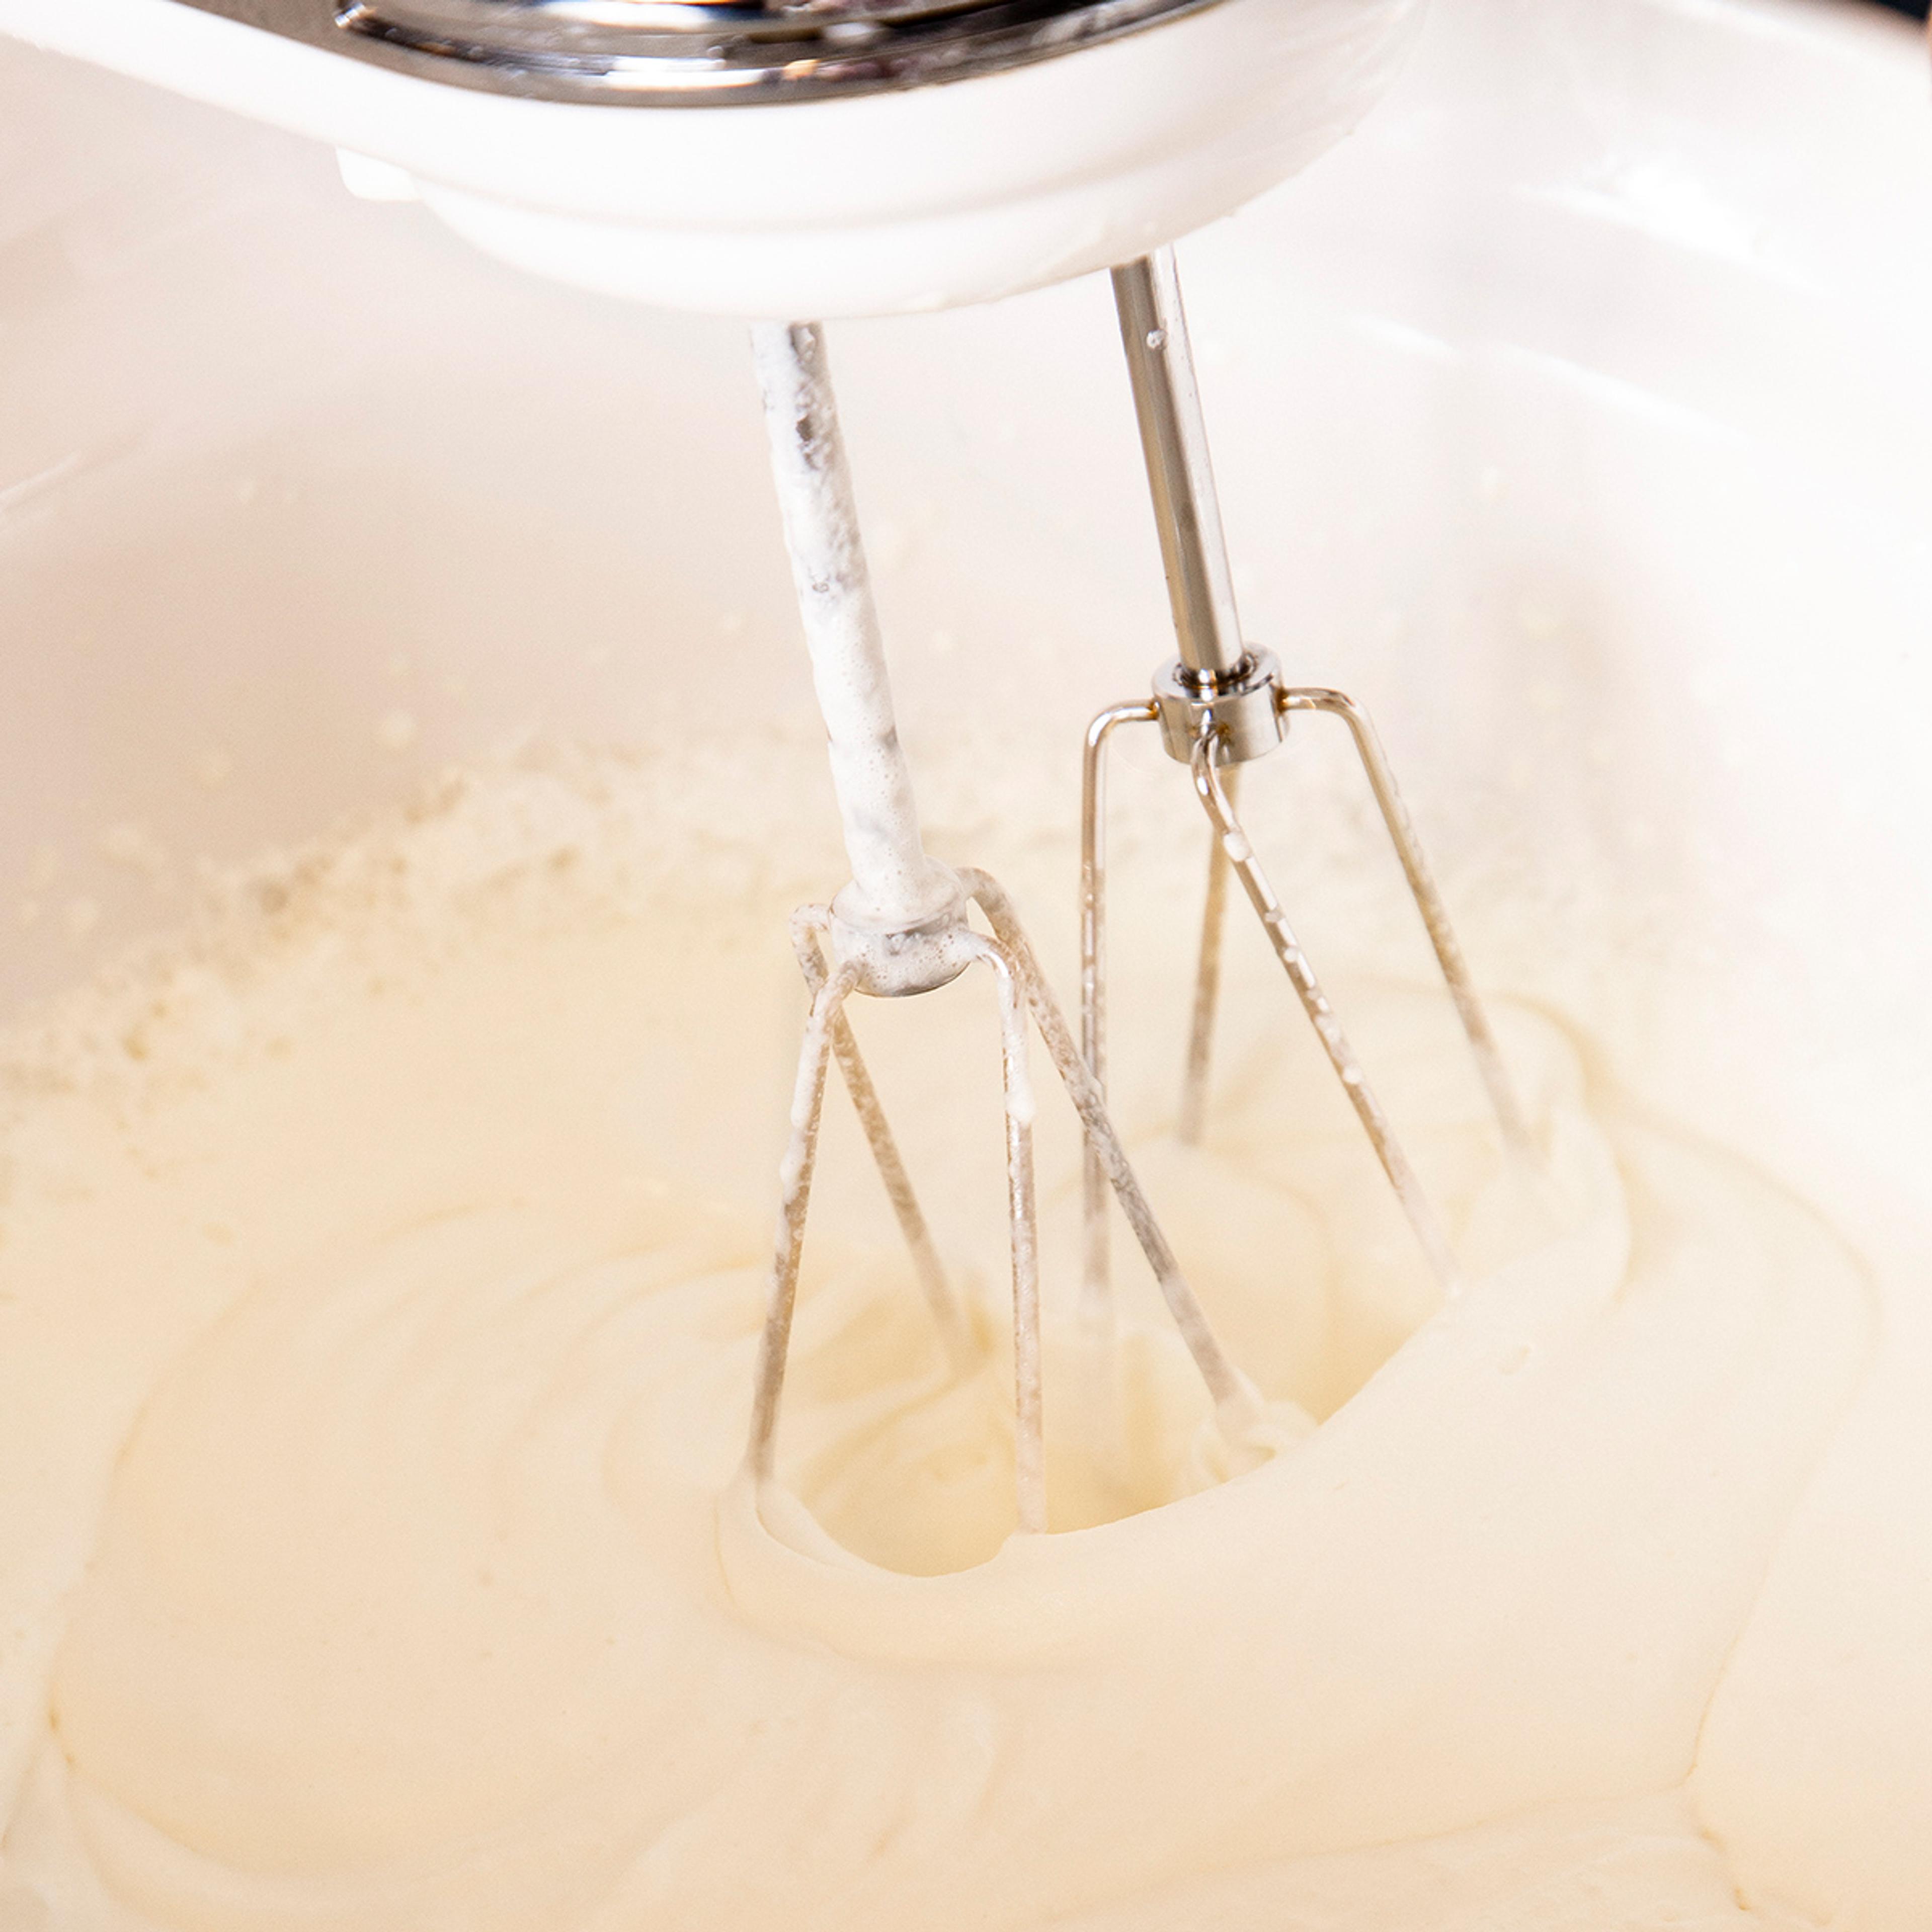 Hand beater whips heavy cream to make homemade whipped cream. Photo by Jackie Stofsick.